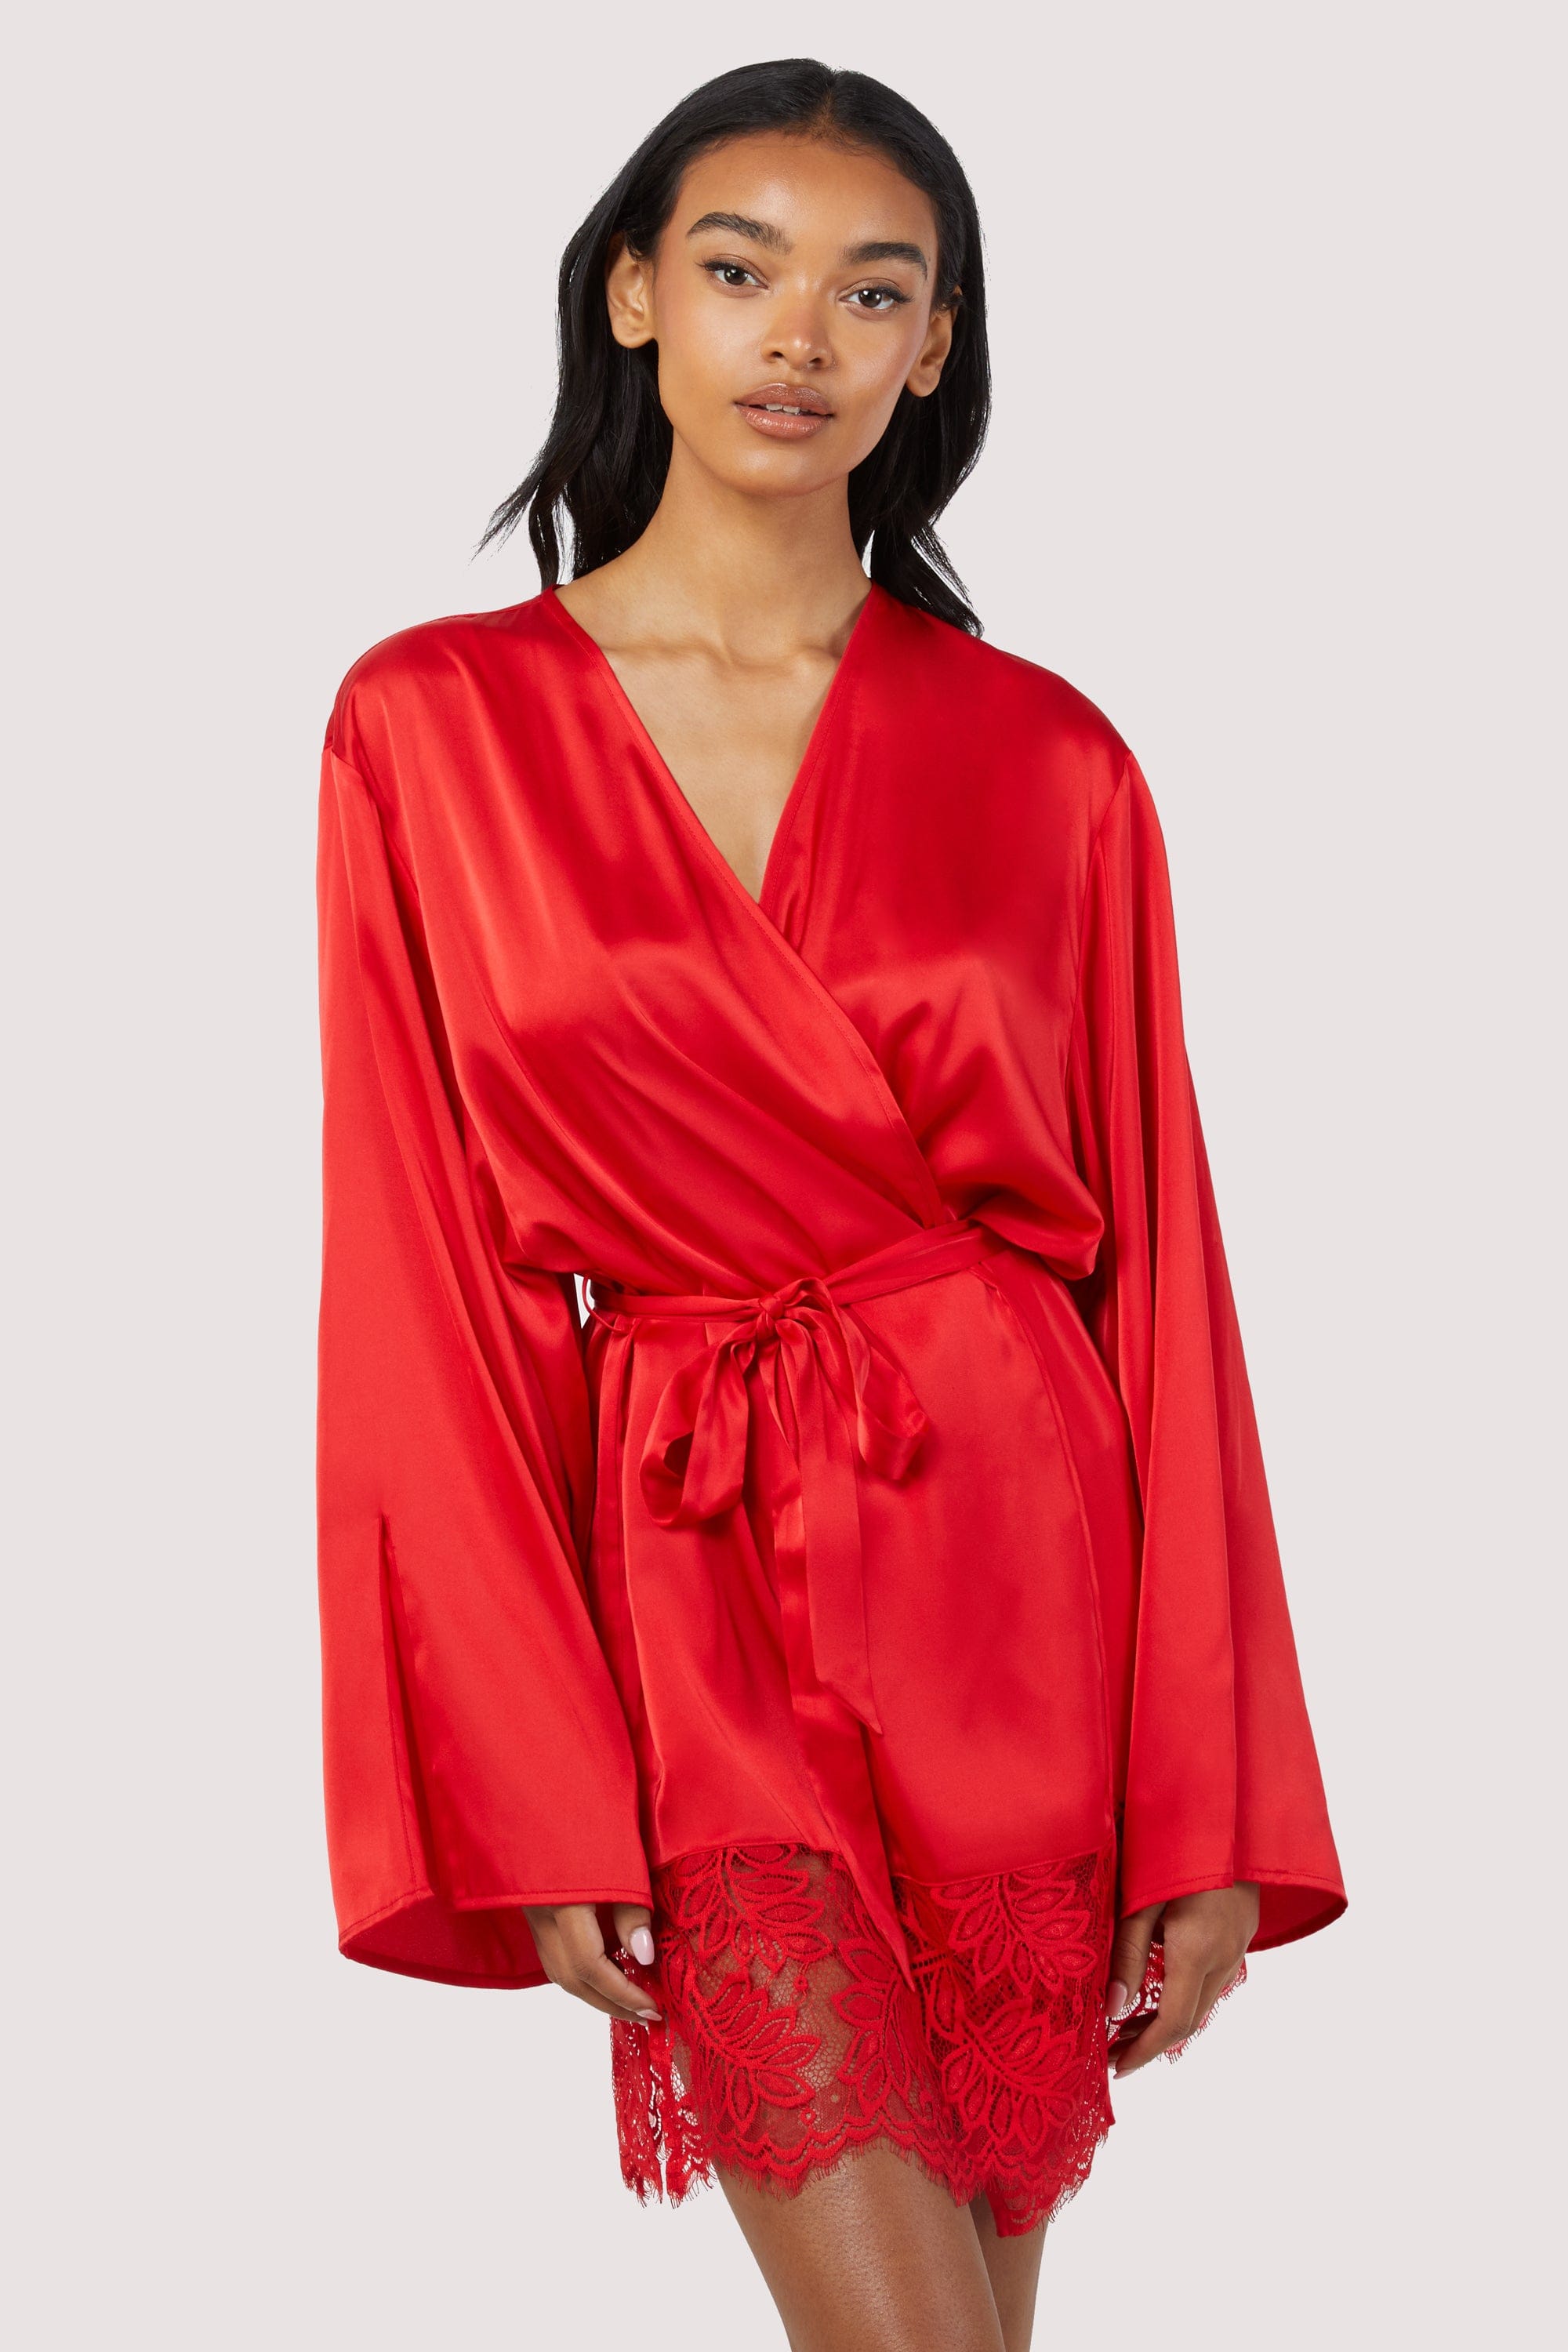 Rosie Red Satin and Lace Robe UK 14